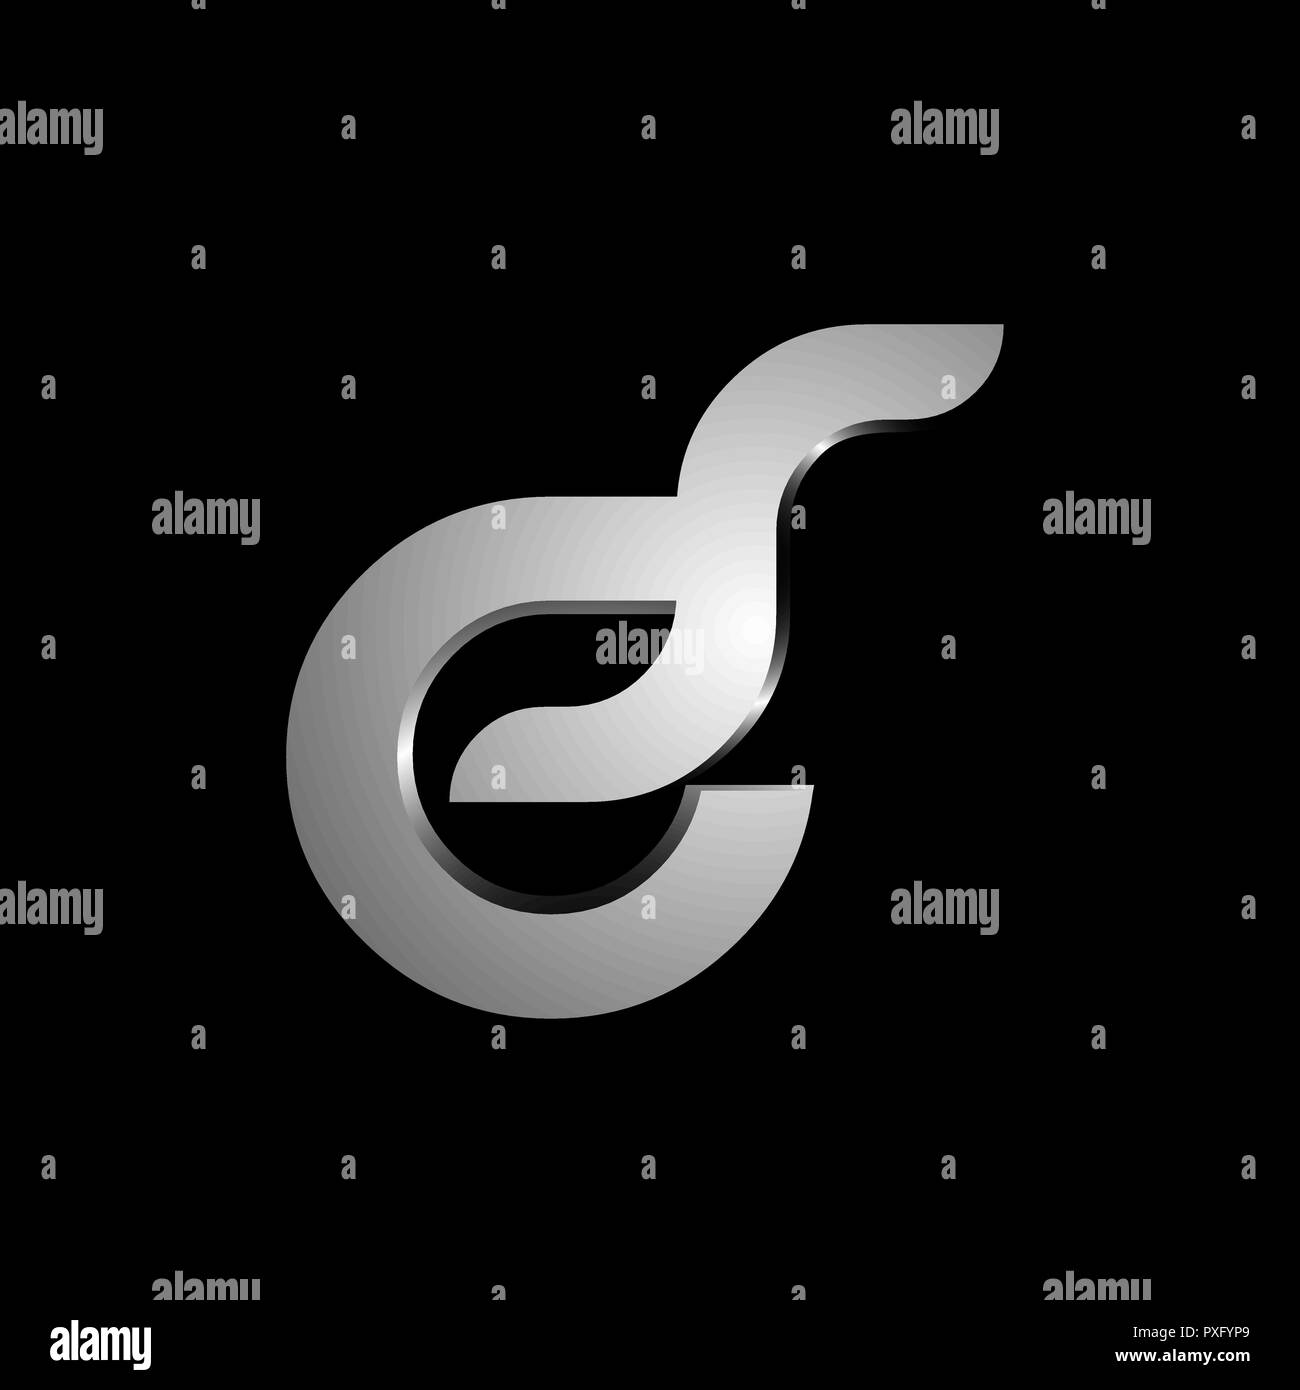 Initial logo Letter c or e and S Logo Design in silver color on Black background Stock Vector